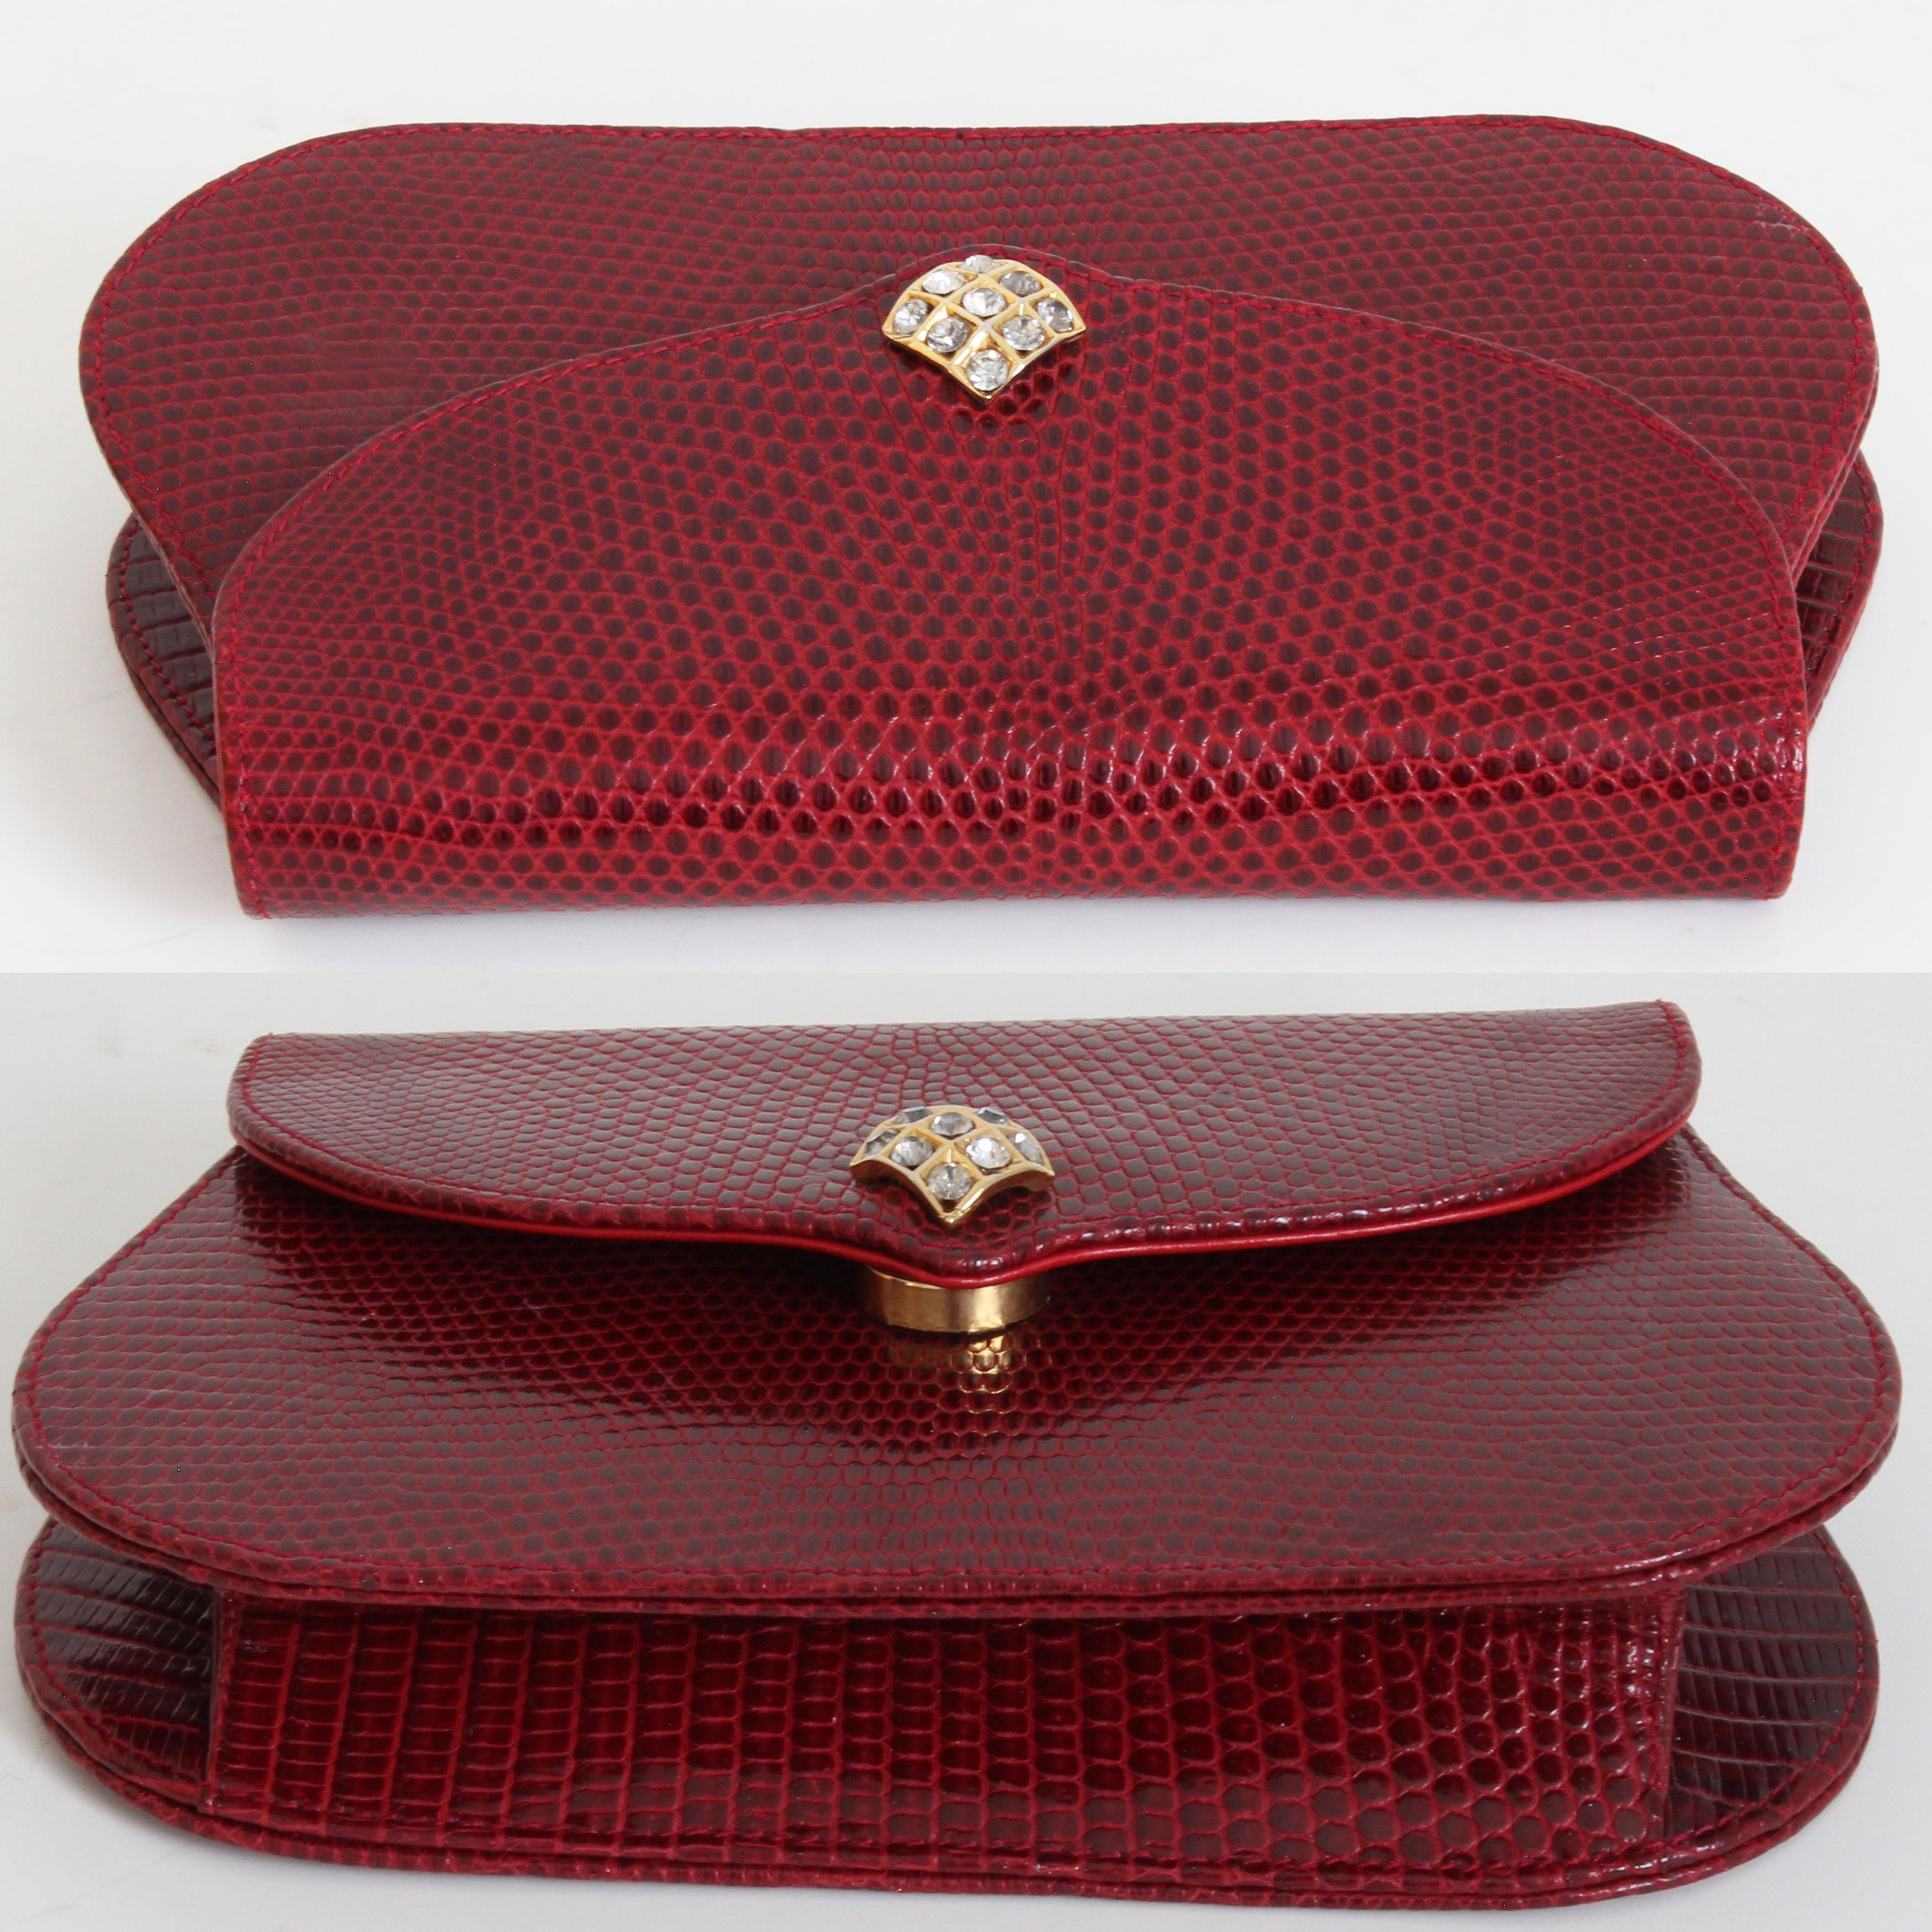 Lana of London Evening Bag Red Lizard Clutch with Chain  2